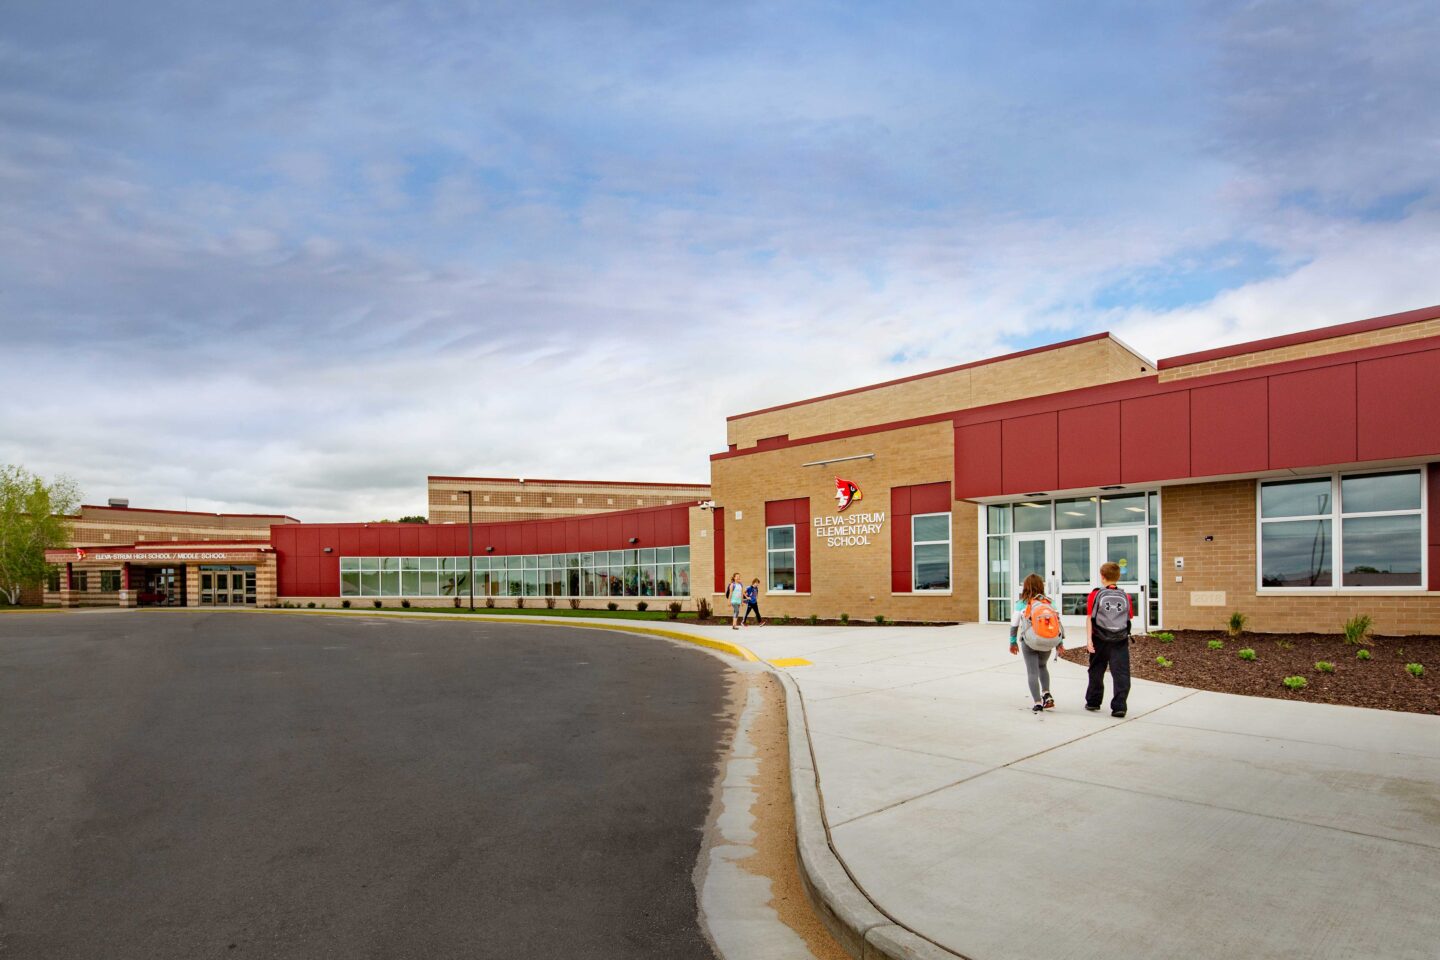 Exterior view of the new elementary addition for the School District of Eleva-Strum, which connects to the existing middle and high school